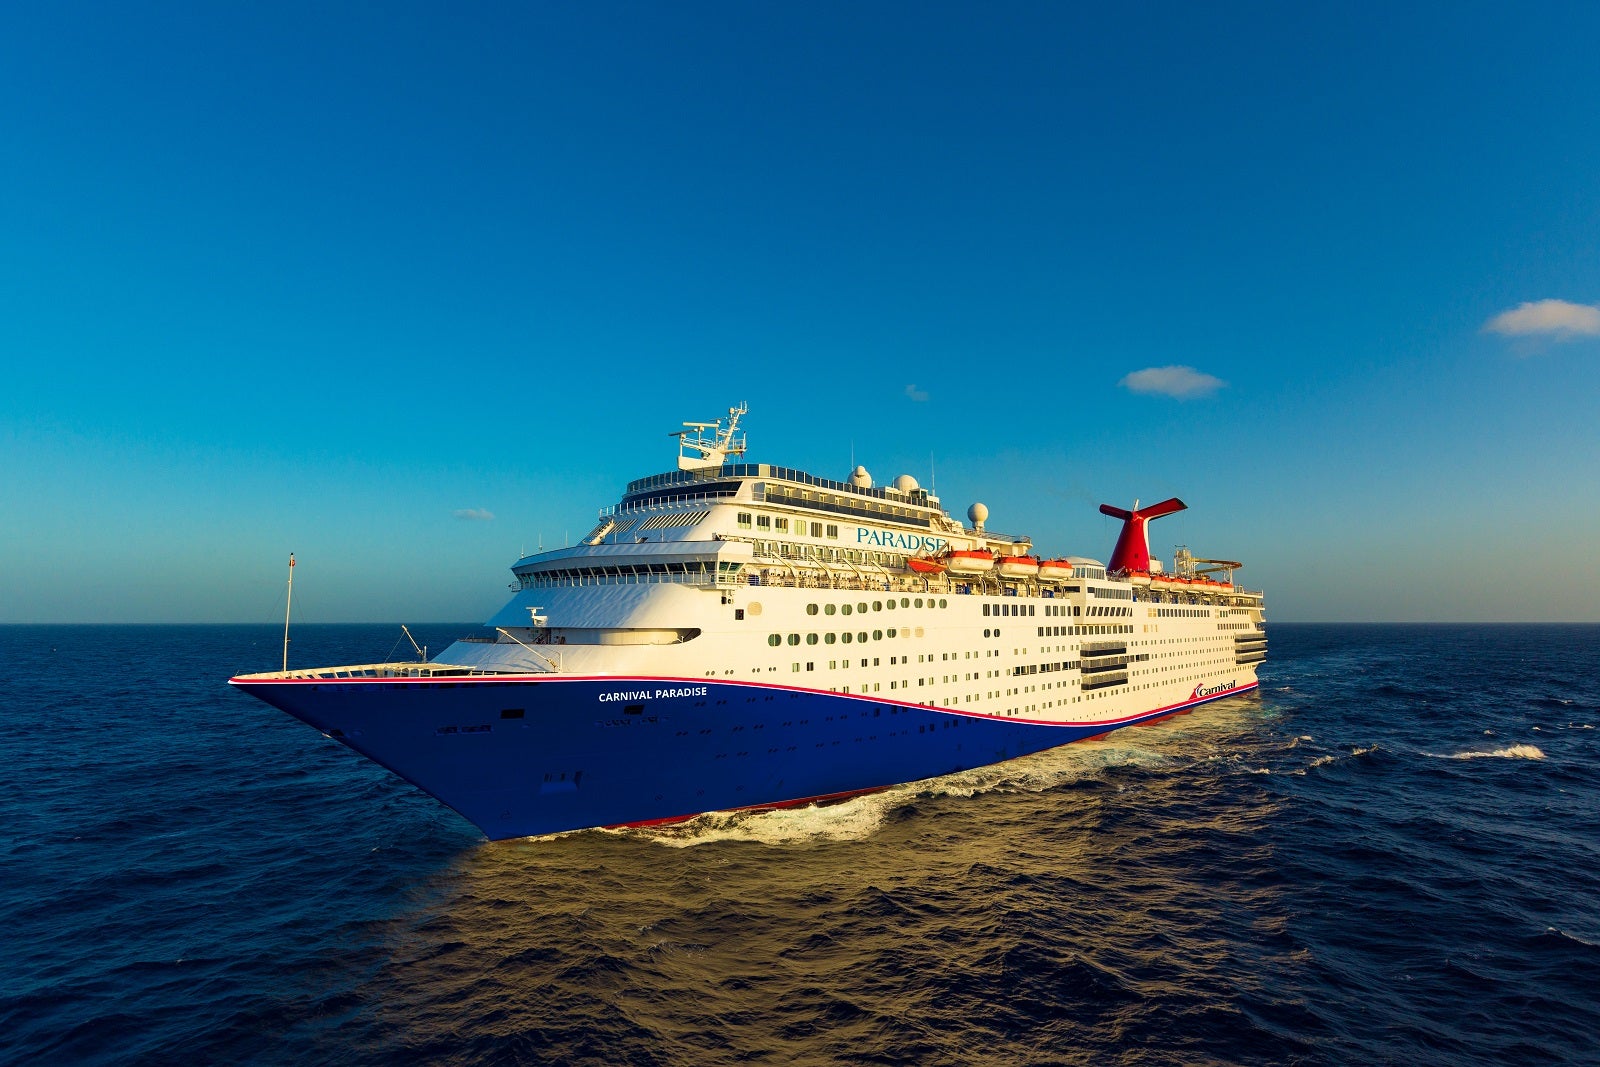 How Many Cruise Ships Does Carnival Cruise Line Have in Their Fleet?